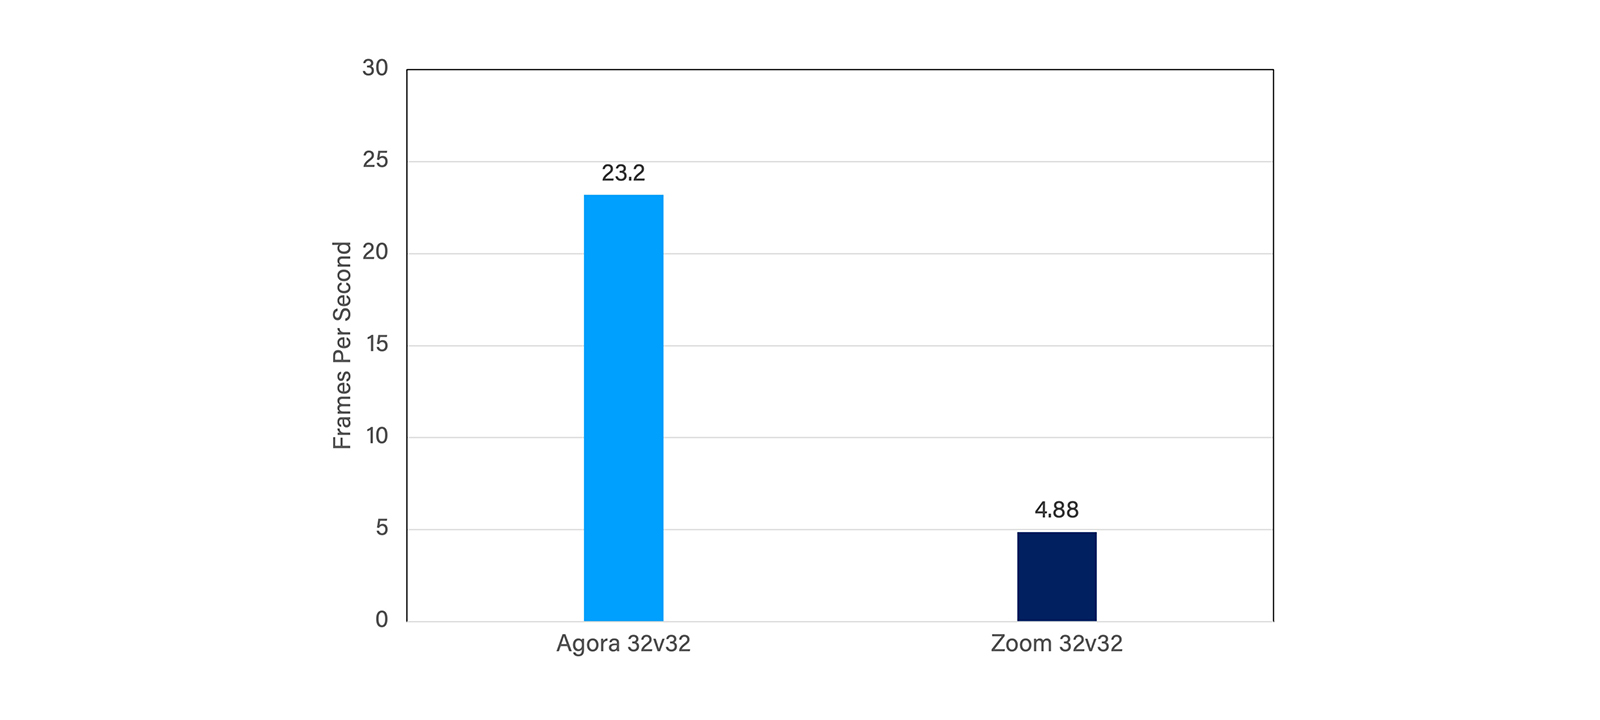 Figure 5: FPS comparison for Agora and Zoom with network having downlink 600ms jitter.